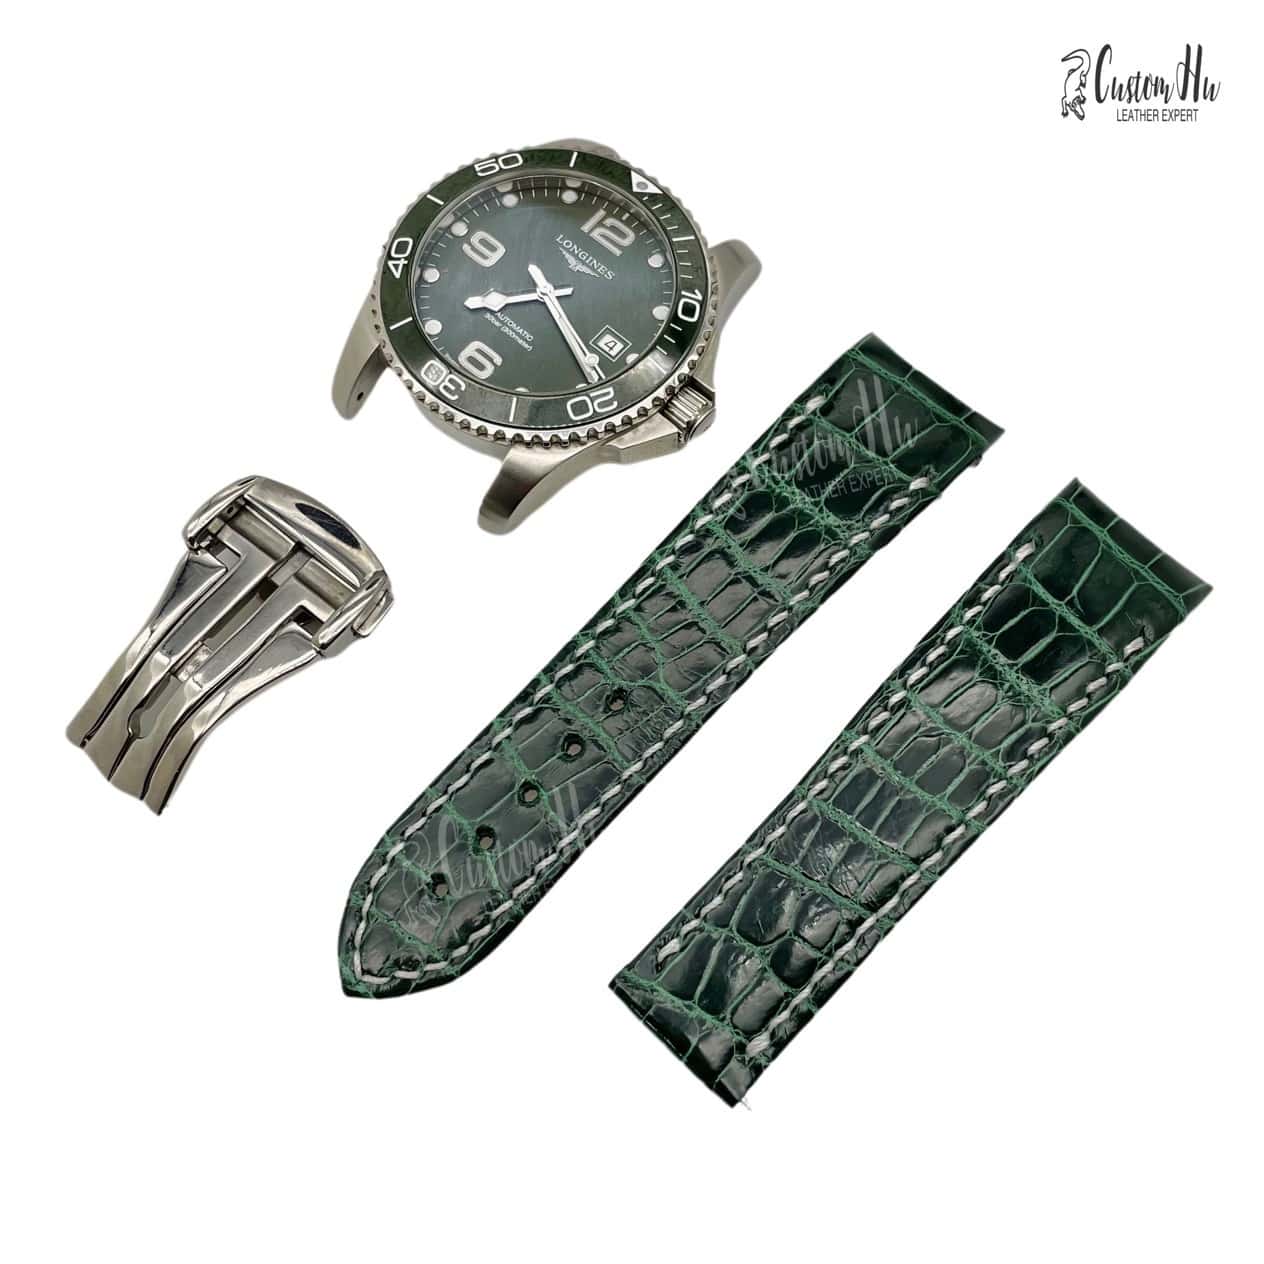 Longines HydroConques strap 21mm Longines Hydro Conques strap 21mm Alligator leather strap